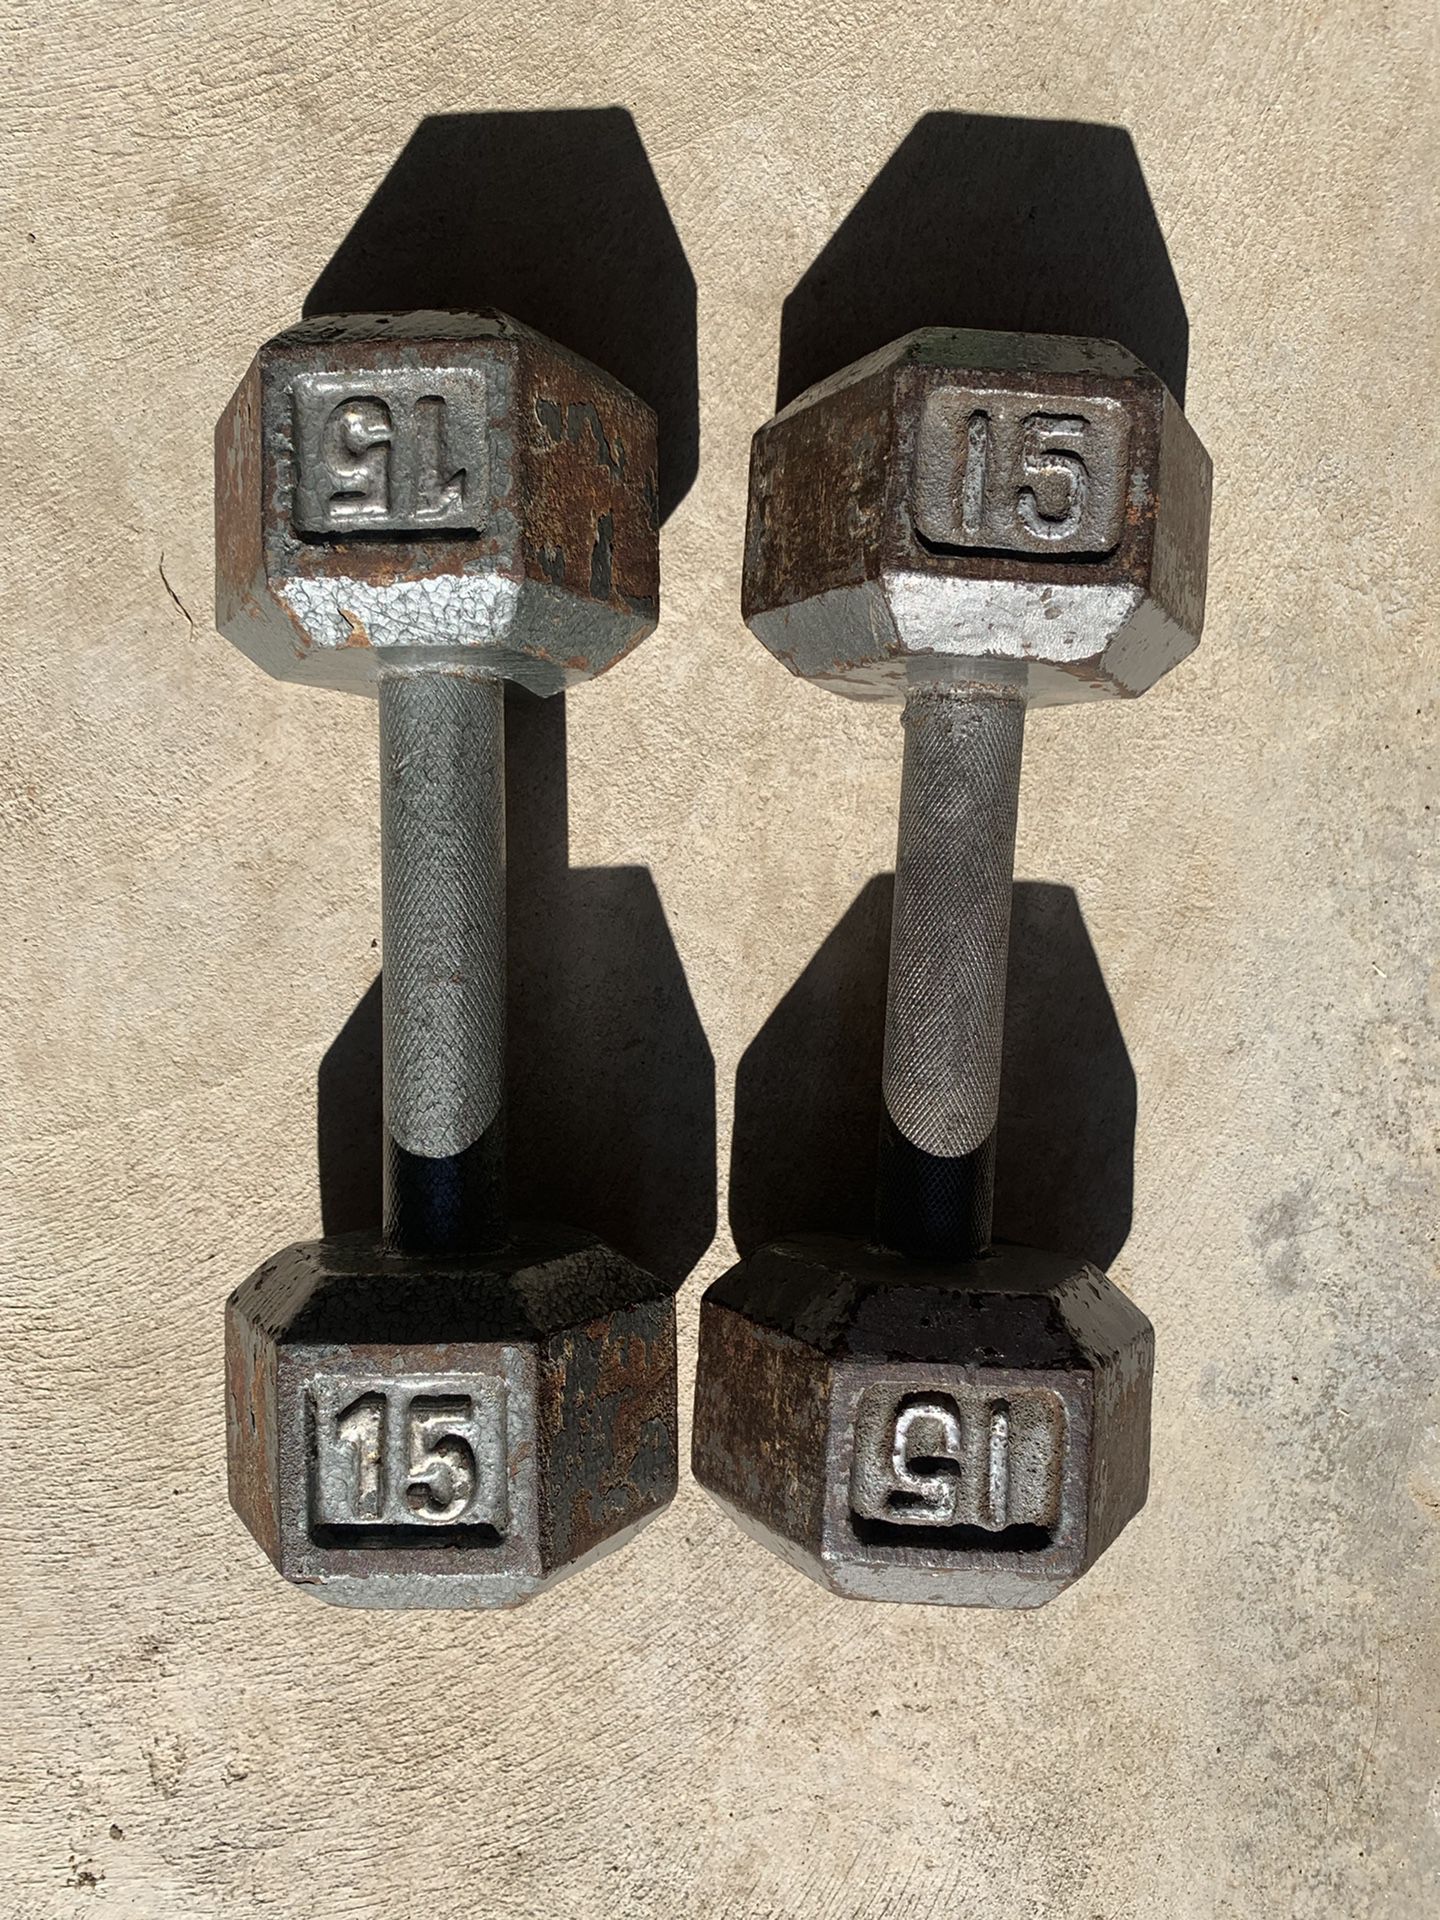 Set of 15lbs weight —— I have more sets available read description below